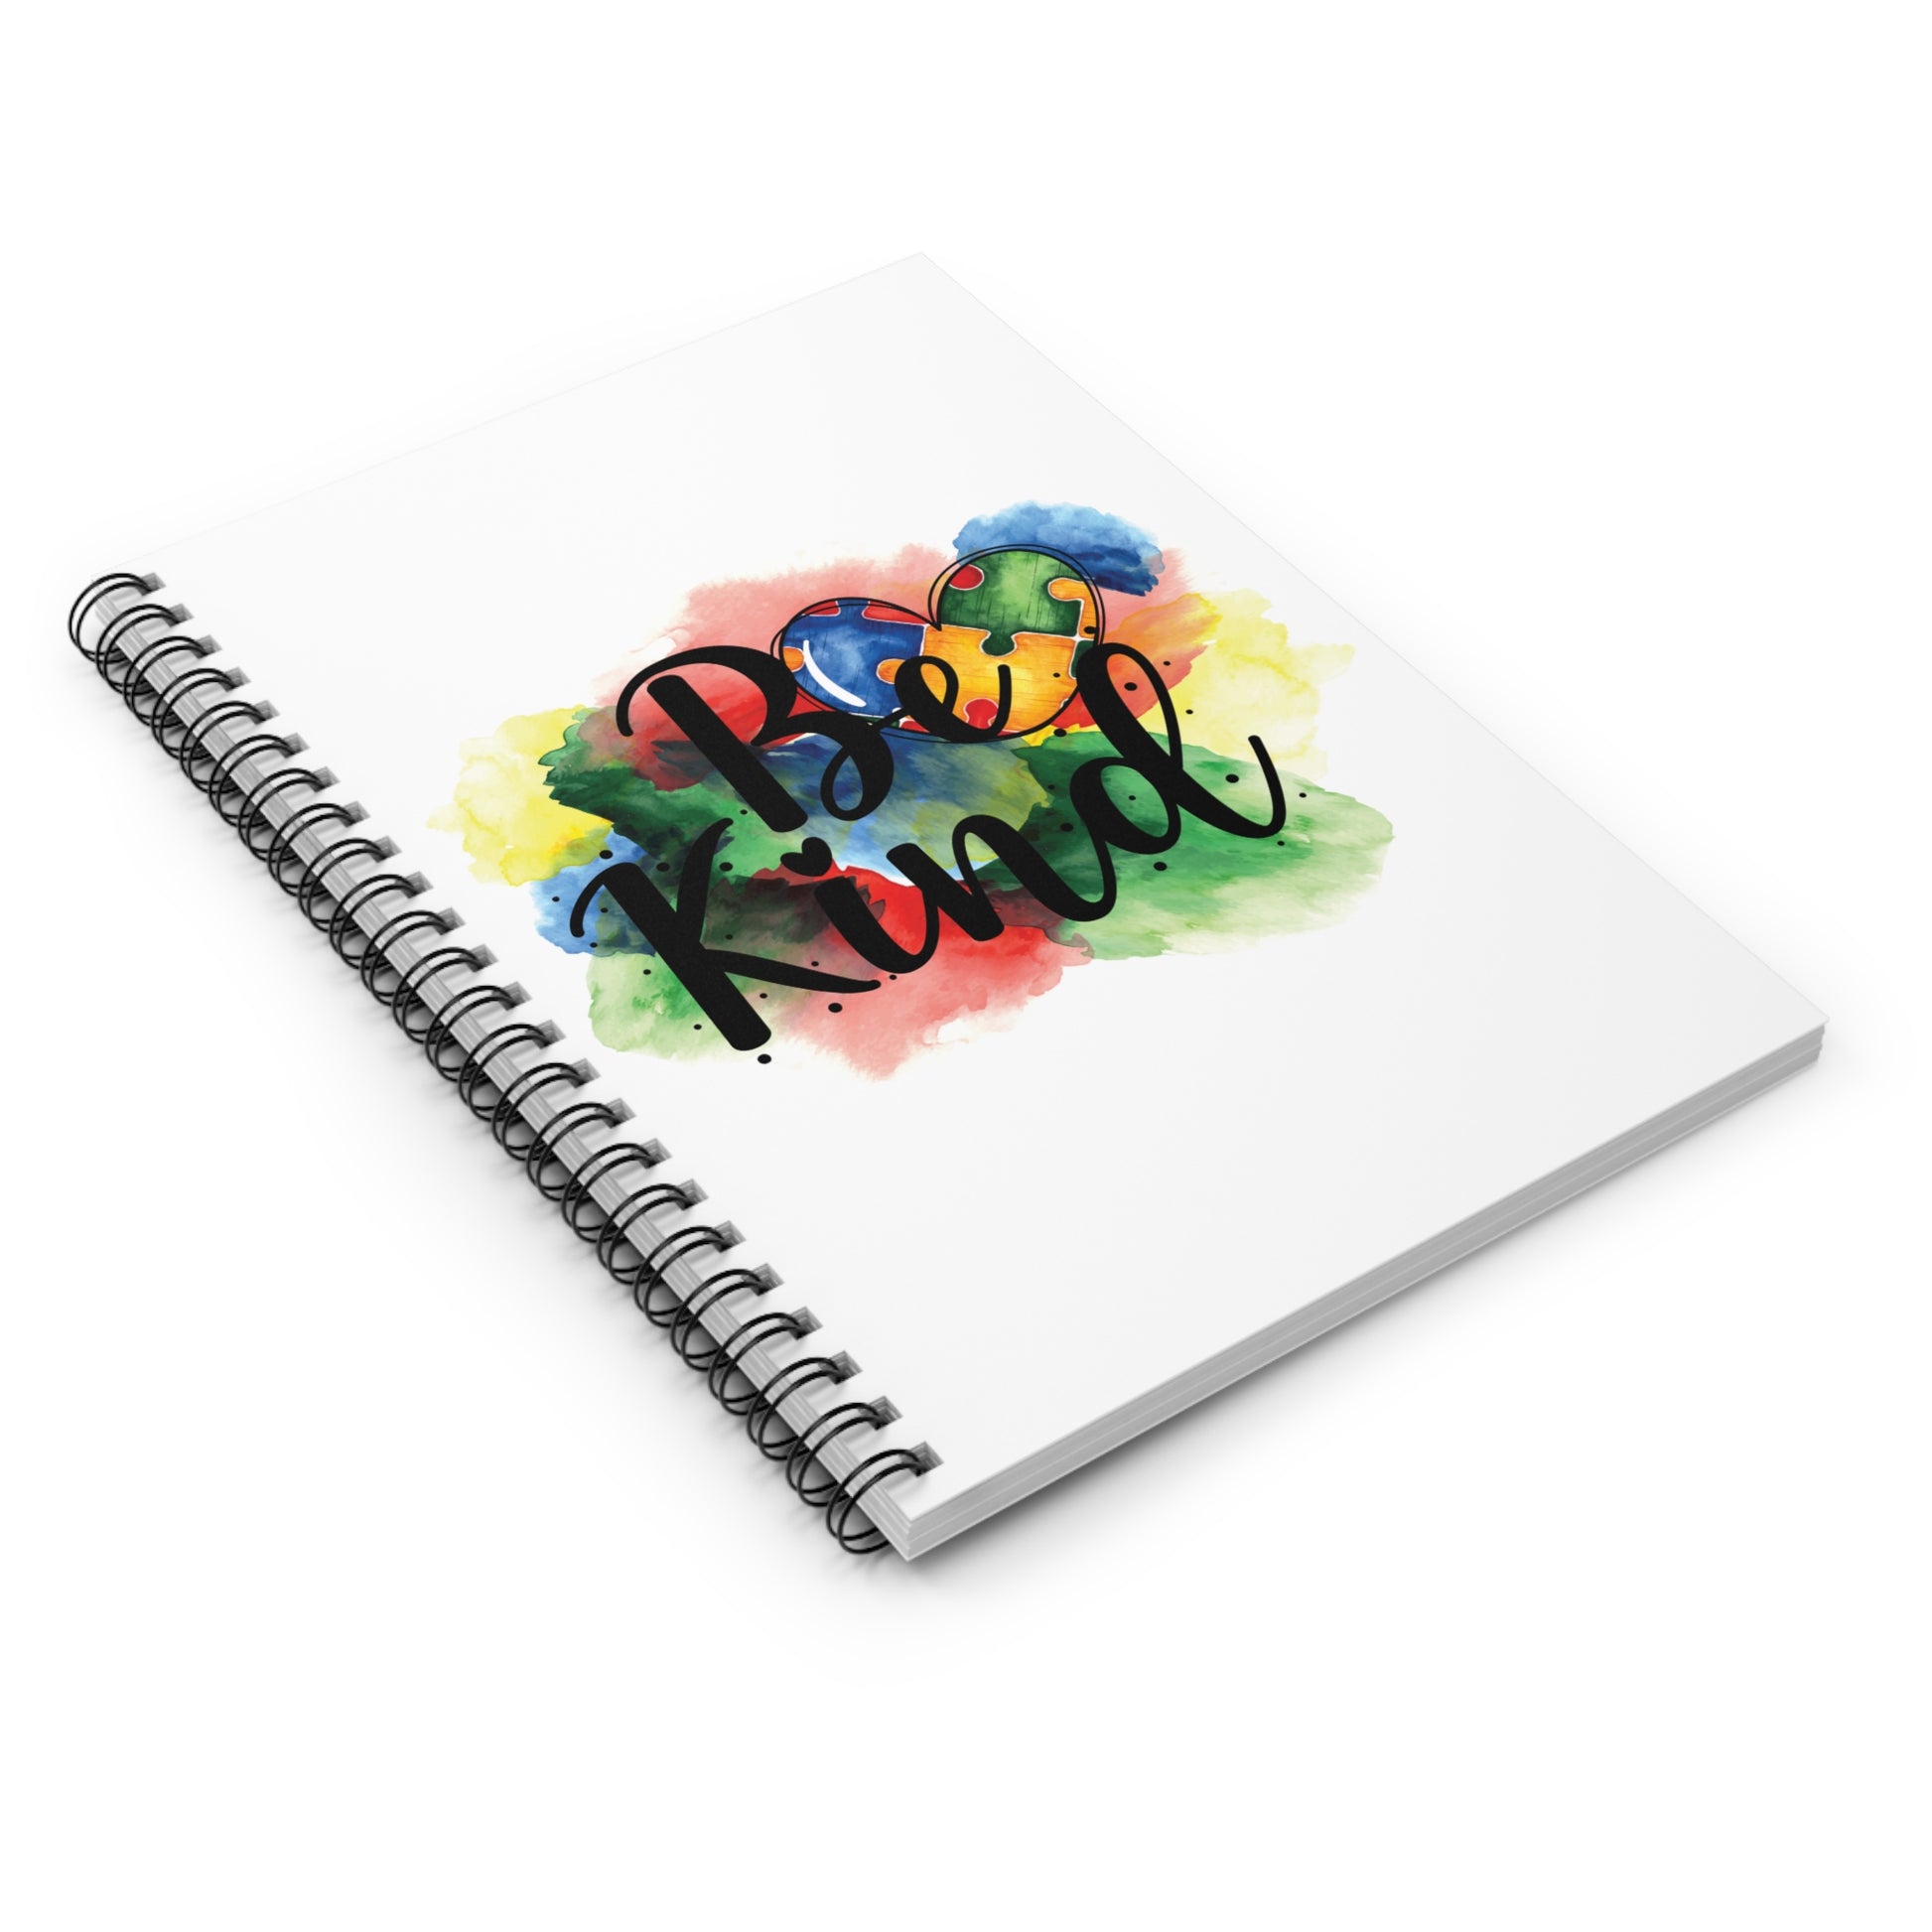 Be Kind Autism Aware: Spiral Notebook - Log Books - Journals - Diaries - and More Custom Printed by TheGlassyLass